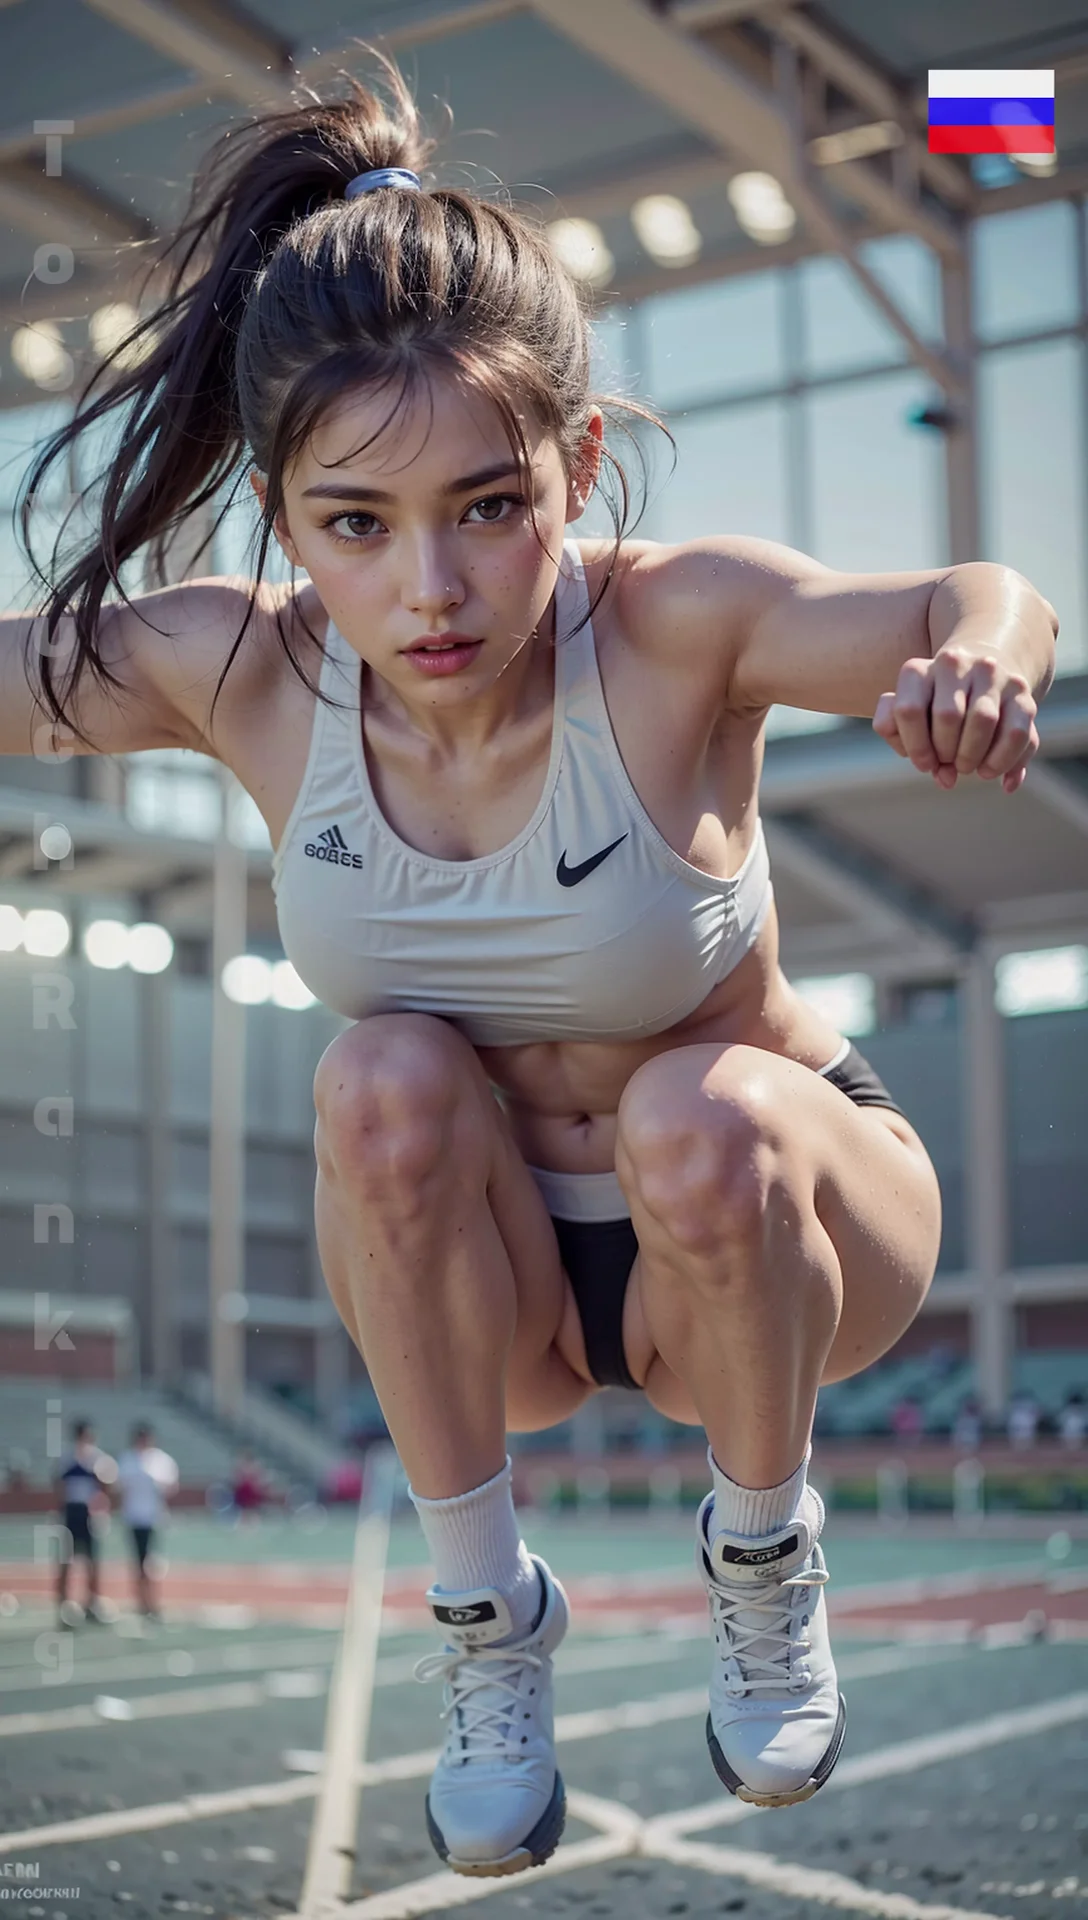 The Most Beautiful Women In Long Jump With Beautiful Bodies image 9